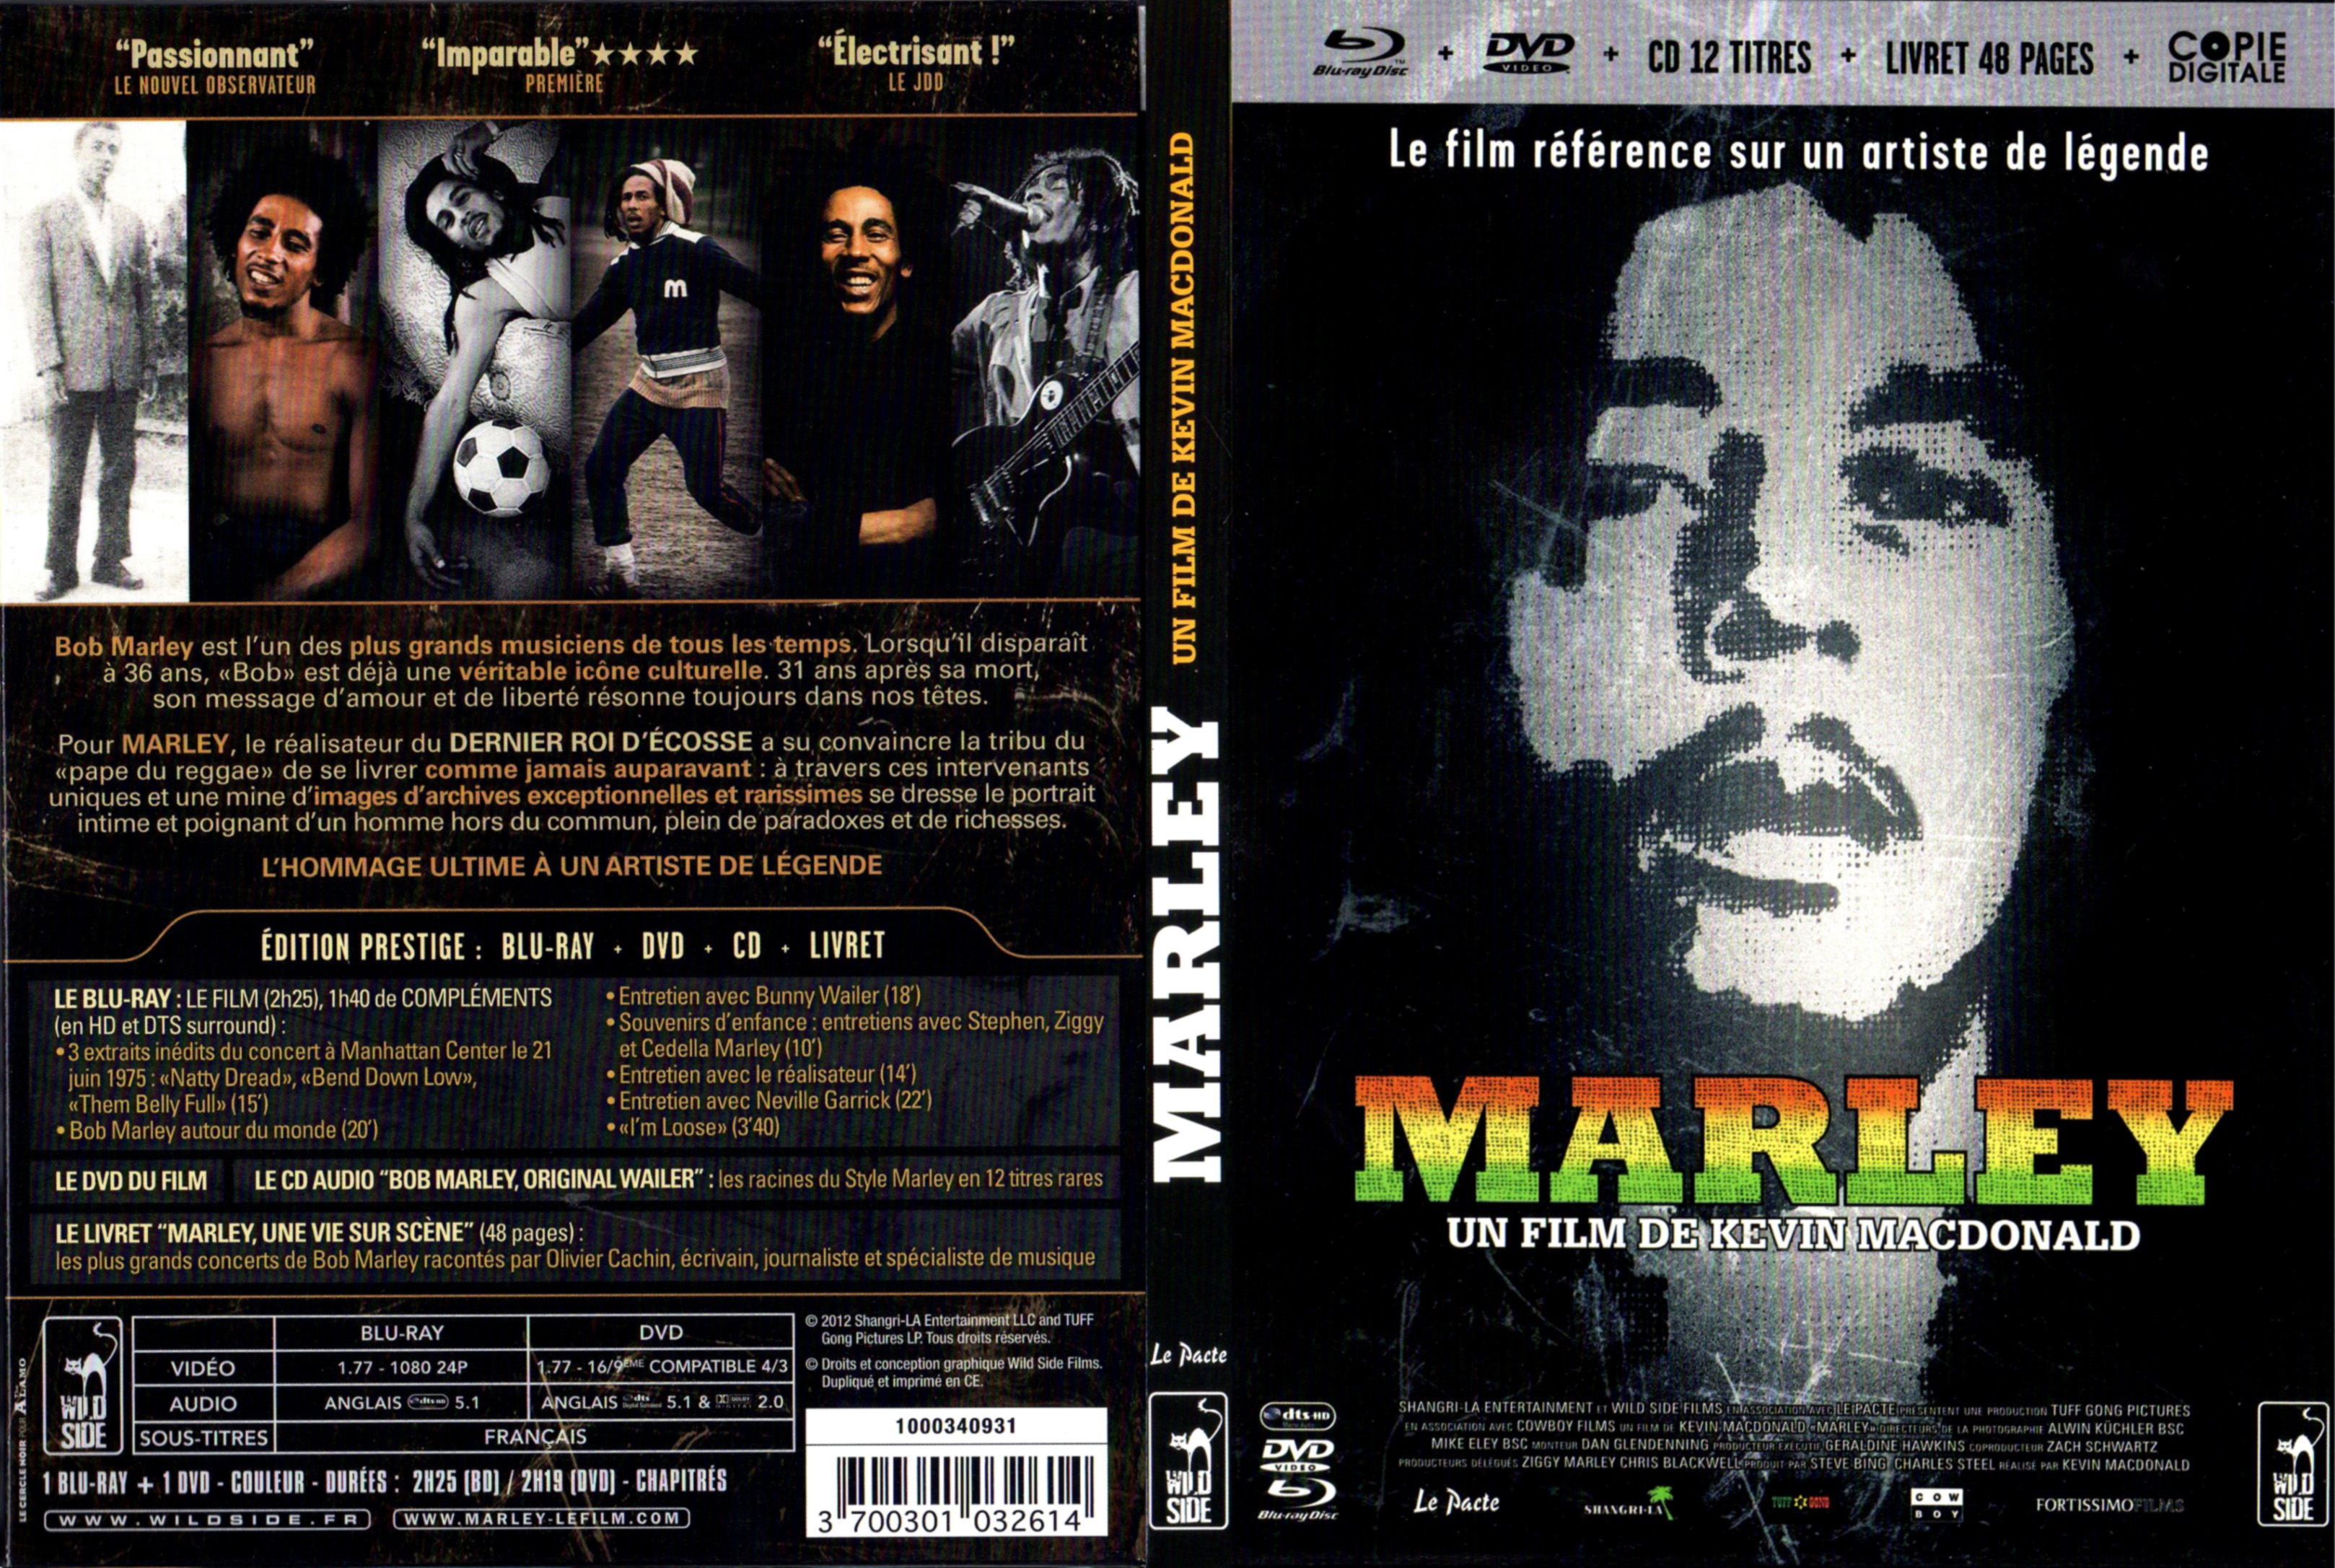 Jaquette DVD Marley (BLU-RAY)